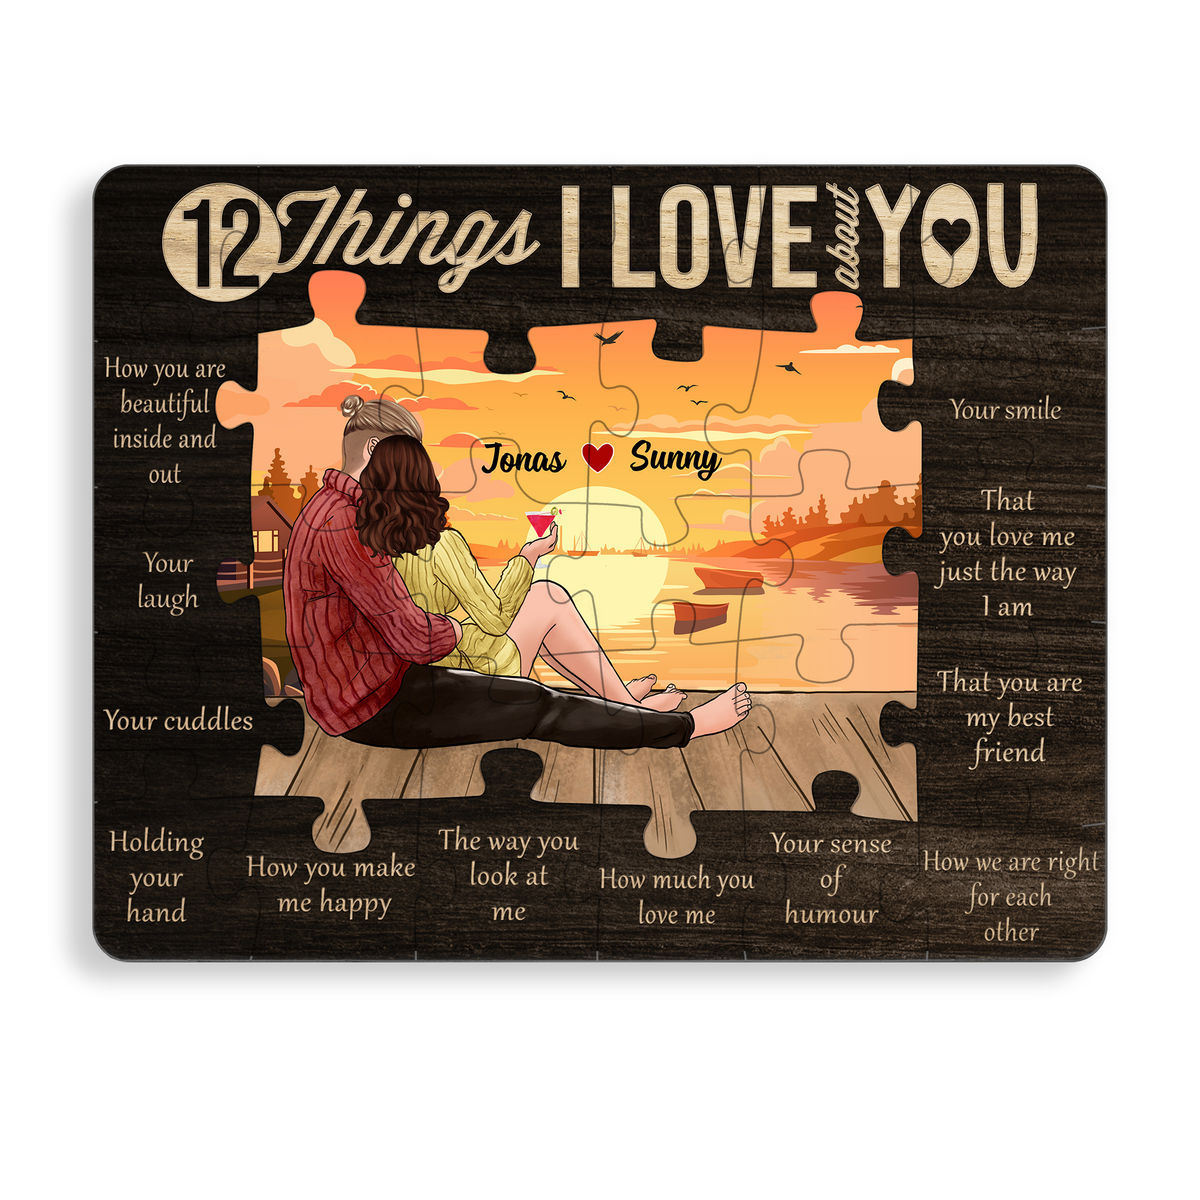 Personalized Jigsaw Puzzles - Couple Gifts - 12 Things I Love About You (42978) - Personalized Puzzle_1